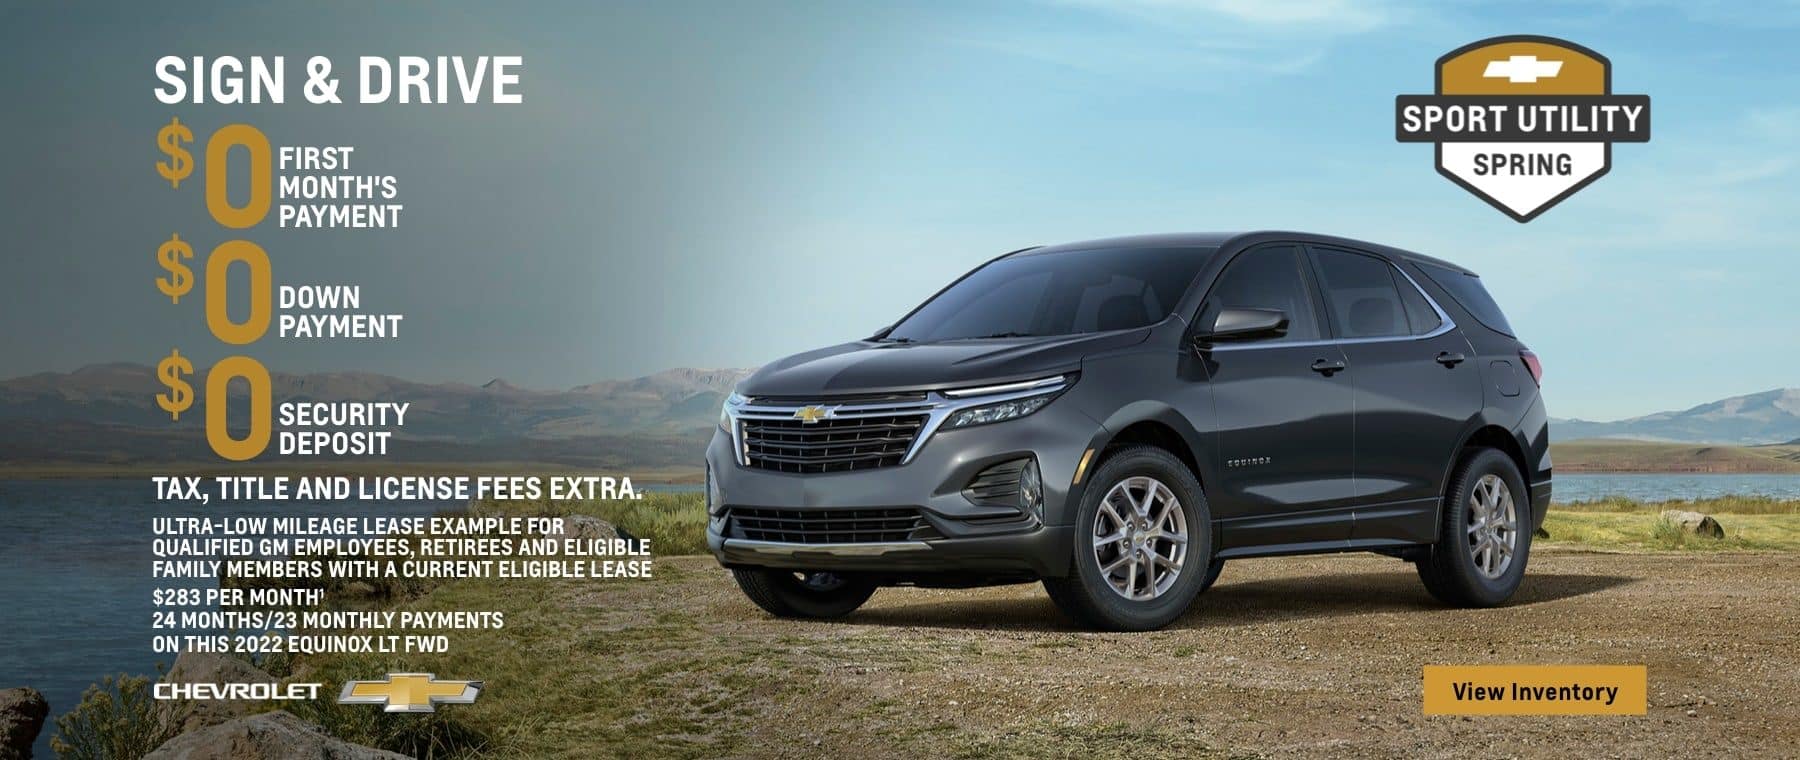 2022 Chevy Equinox LT FWD. Life is better in a Chevy Equinox. Ultra-low mileage lease example for qualified GM employees, retirees and eligible family members with a current eligible lease. 24 months/23 monthly payments. $283 per month. $0 First month's payment. $0 down payment. $0 security deposit. Tax, title and license fees extra. No security deposit required. Mileage charge of $0.25/mile over 20,000 miles.